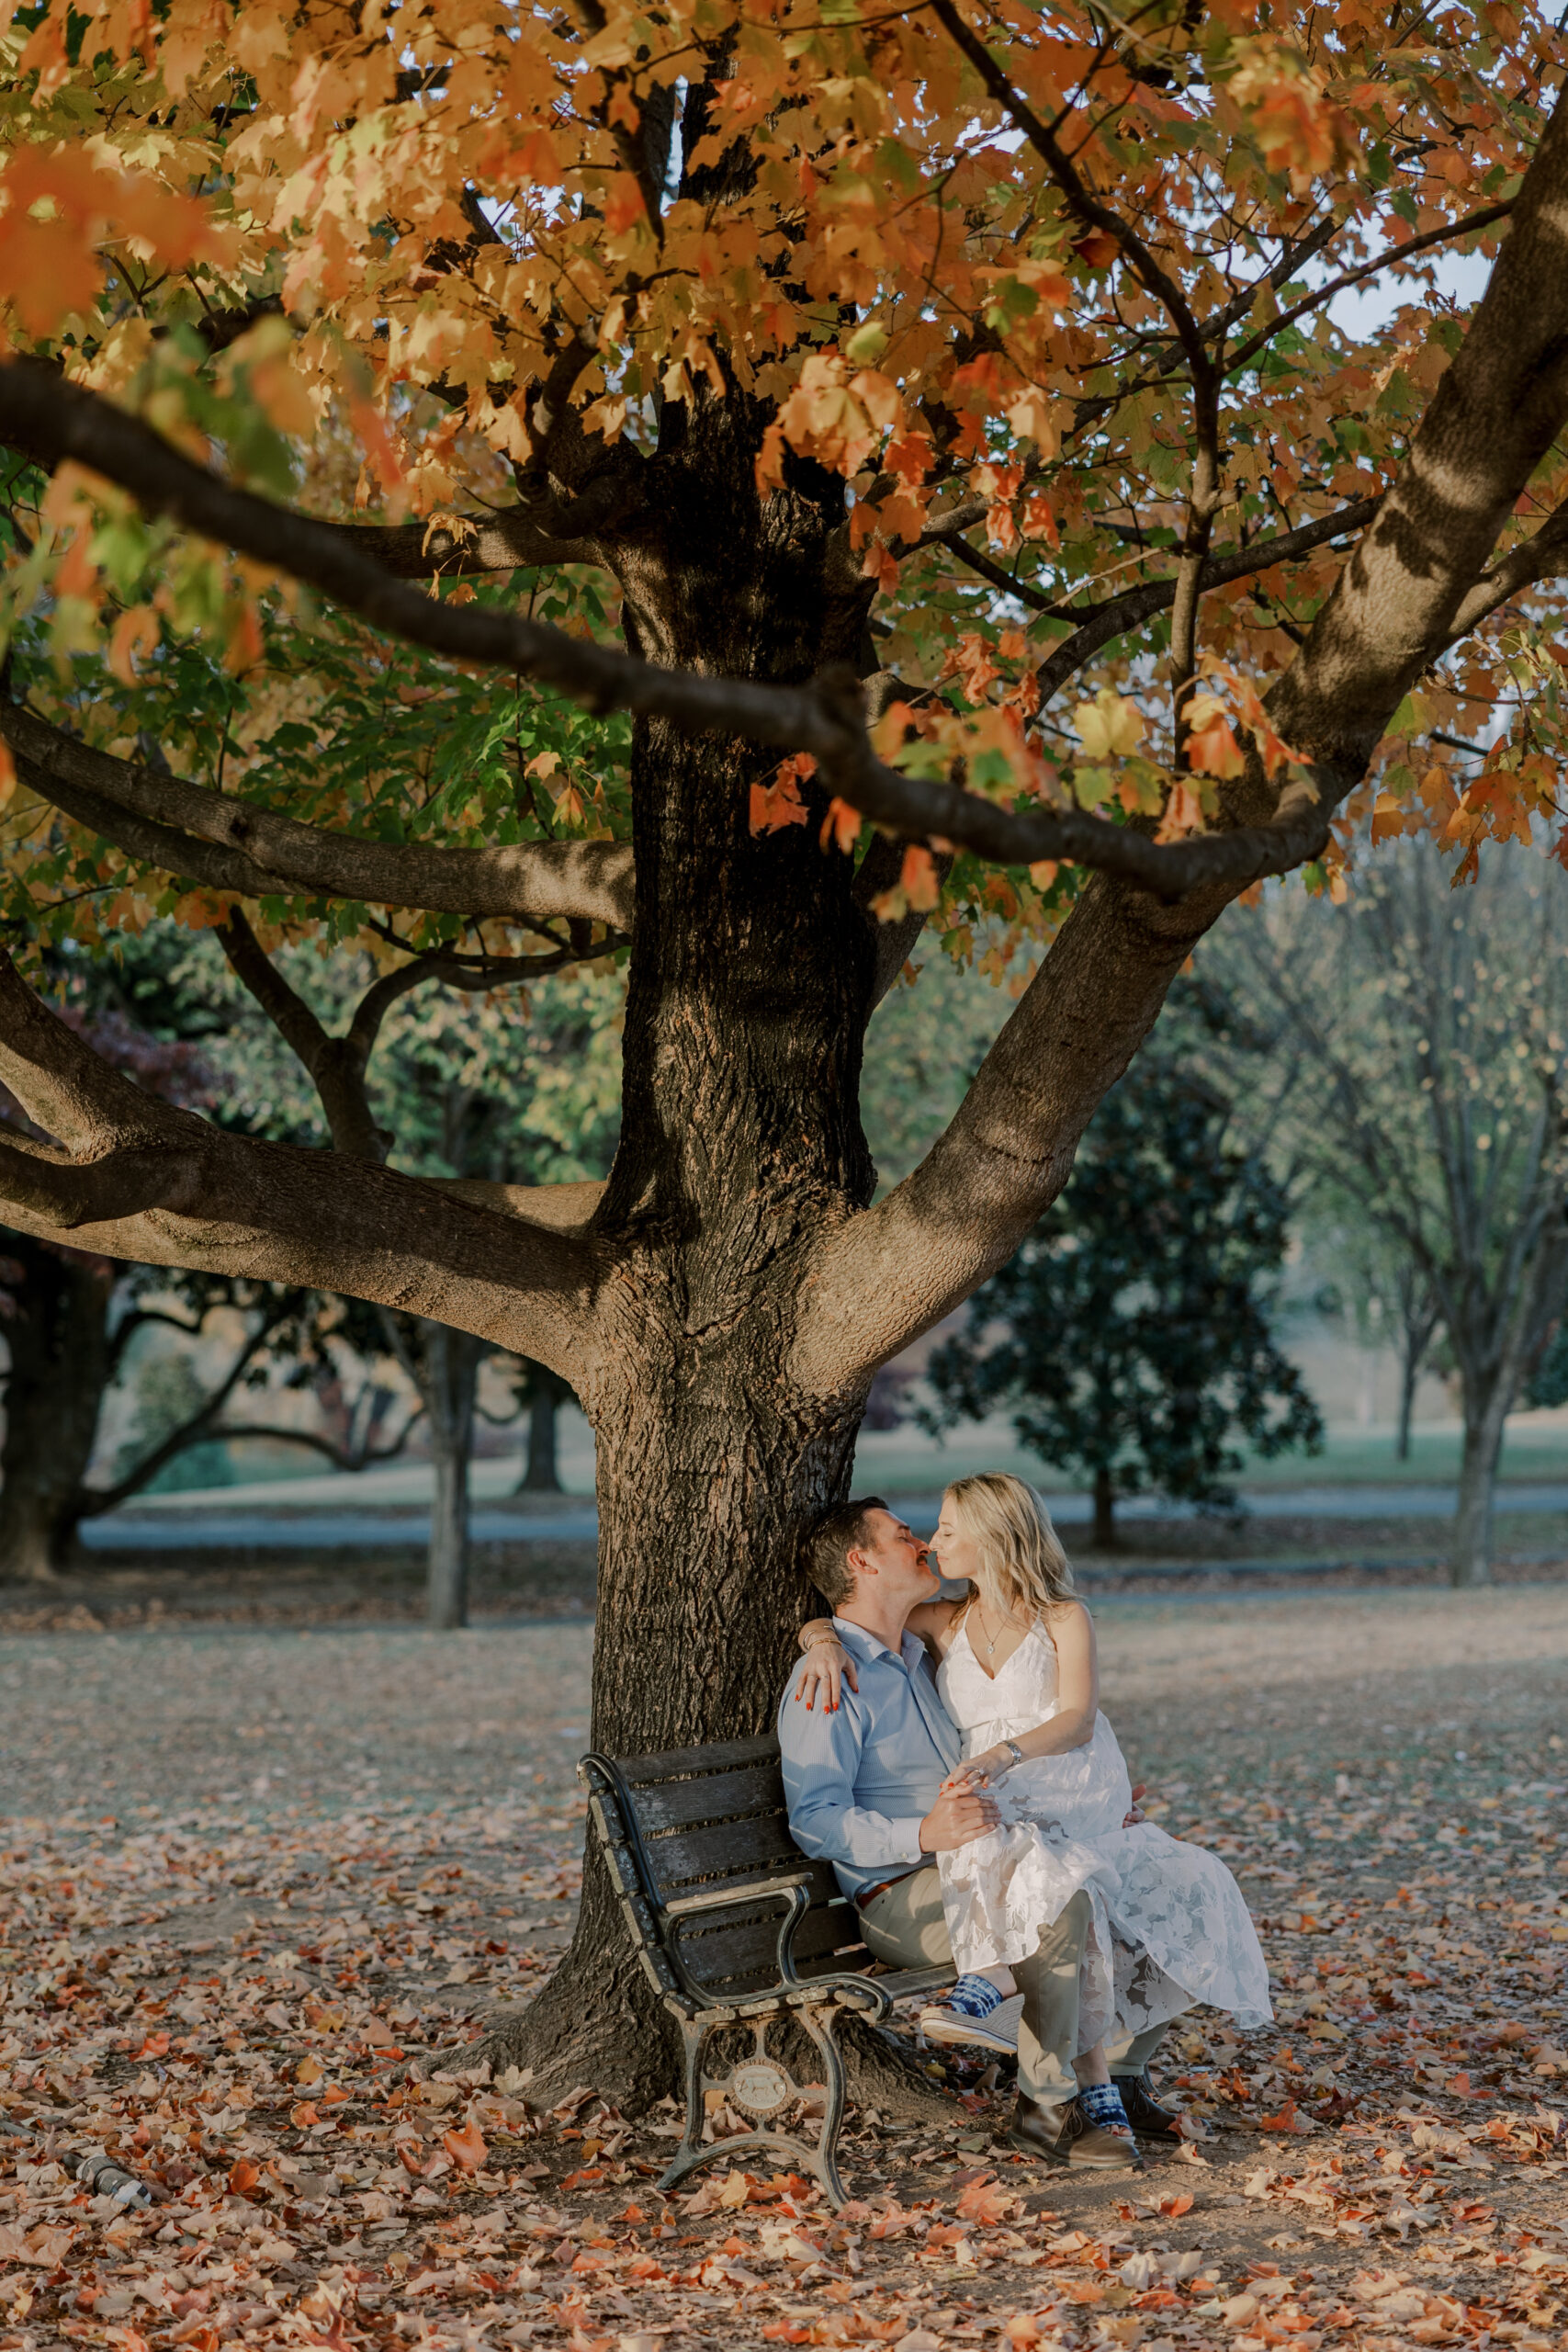 image of engaged couple sitting on bench sharing a ksis under a tree with orange leaves on it